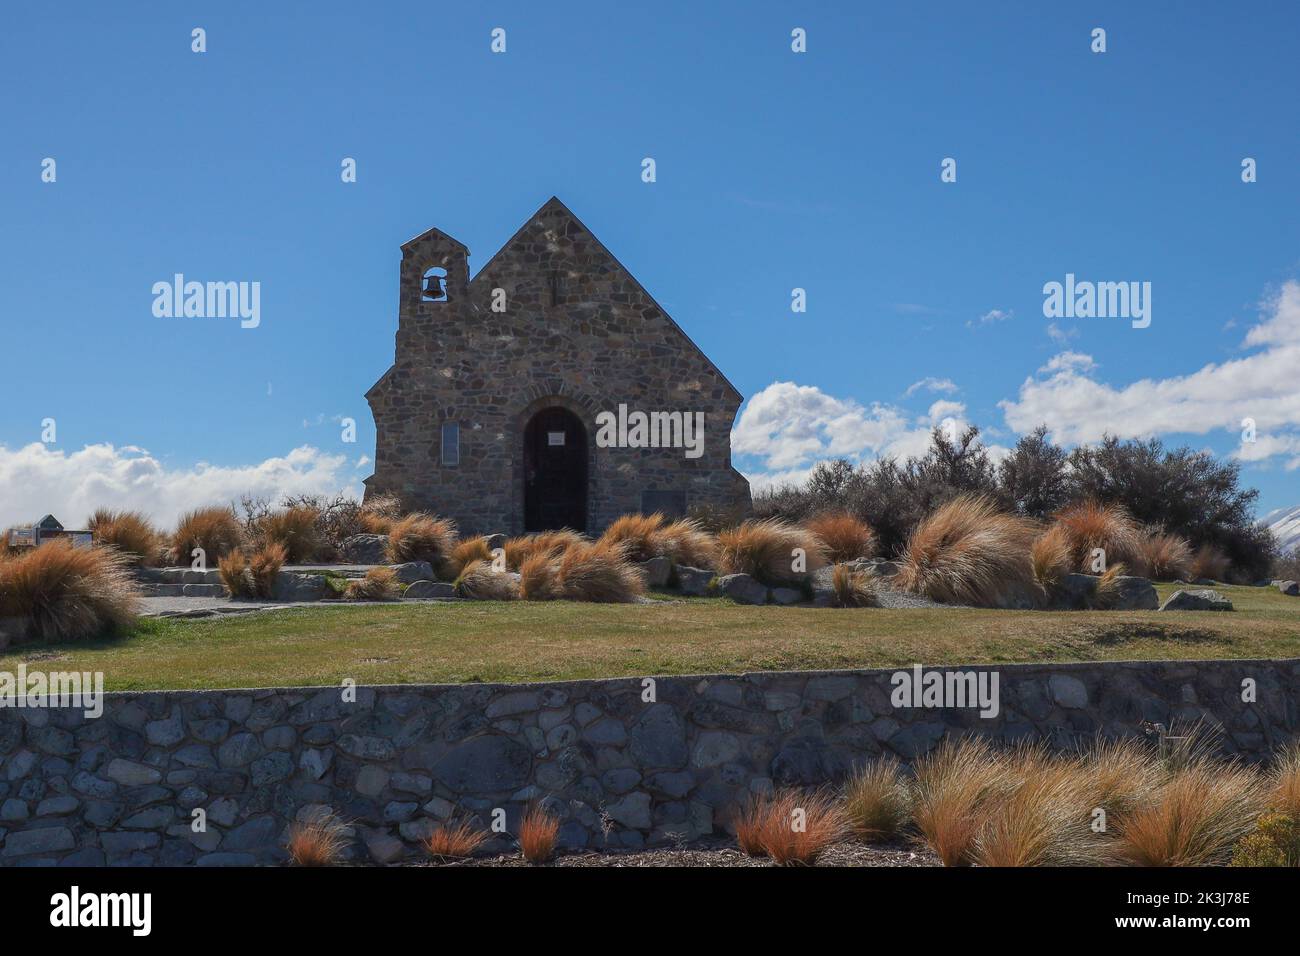 A Good Shepherd church view with precinct view, yellow tussock grass around and blue sky background Stock Photo